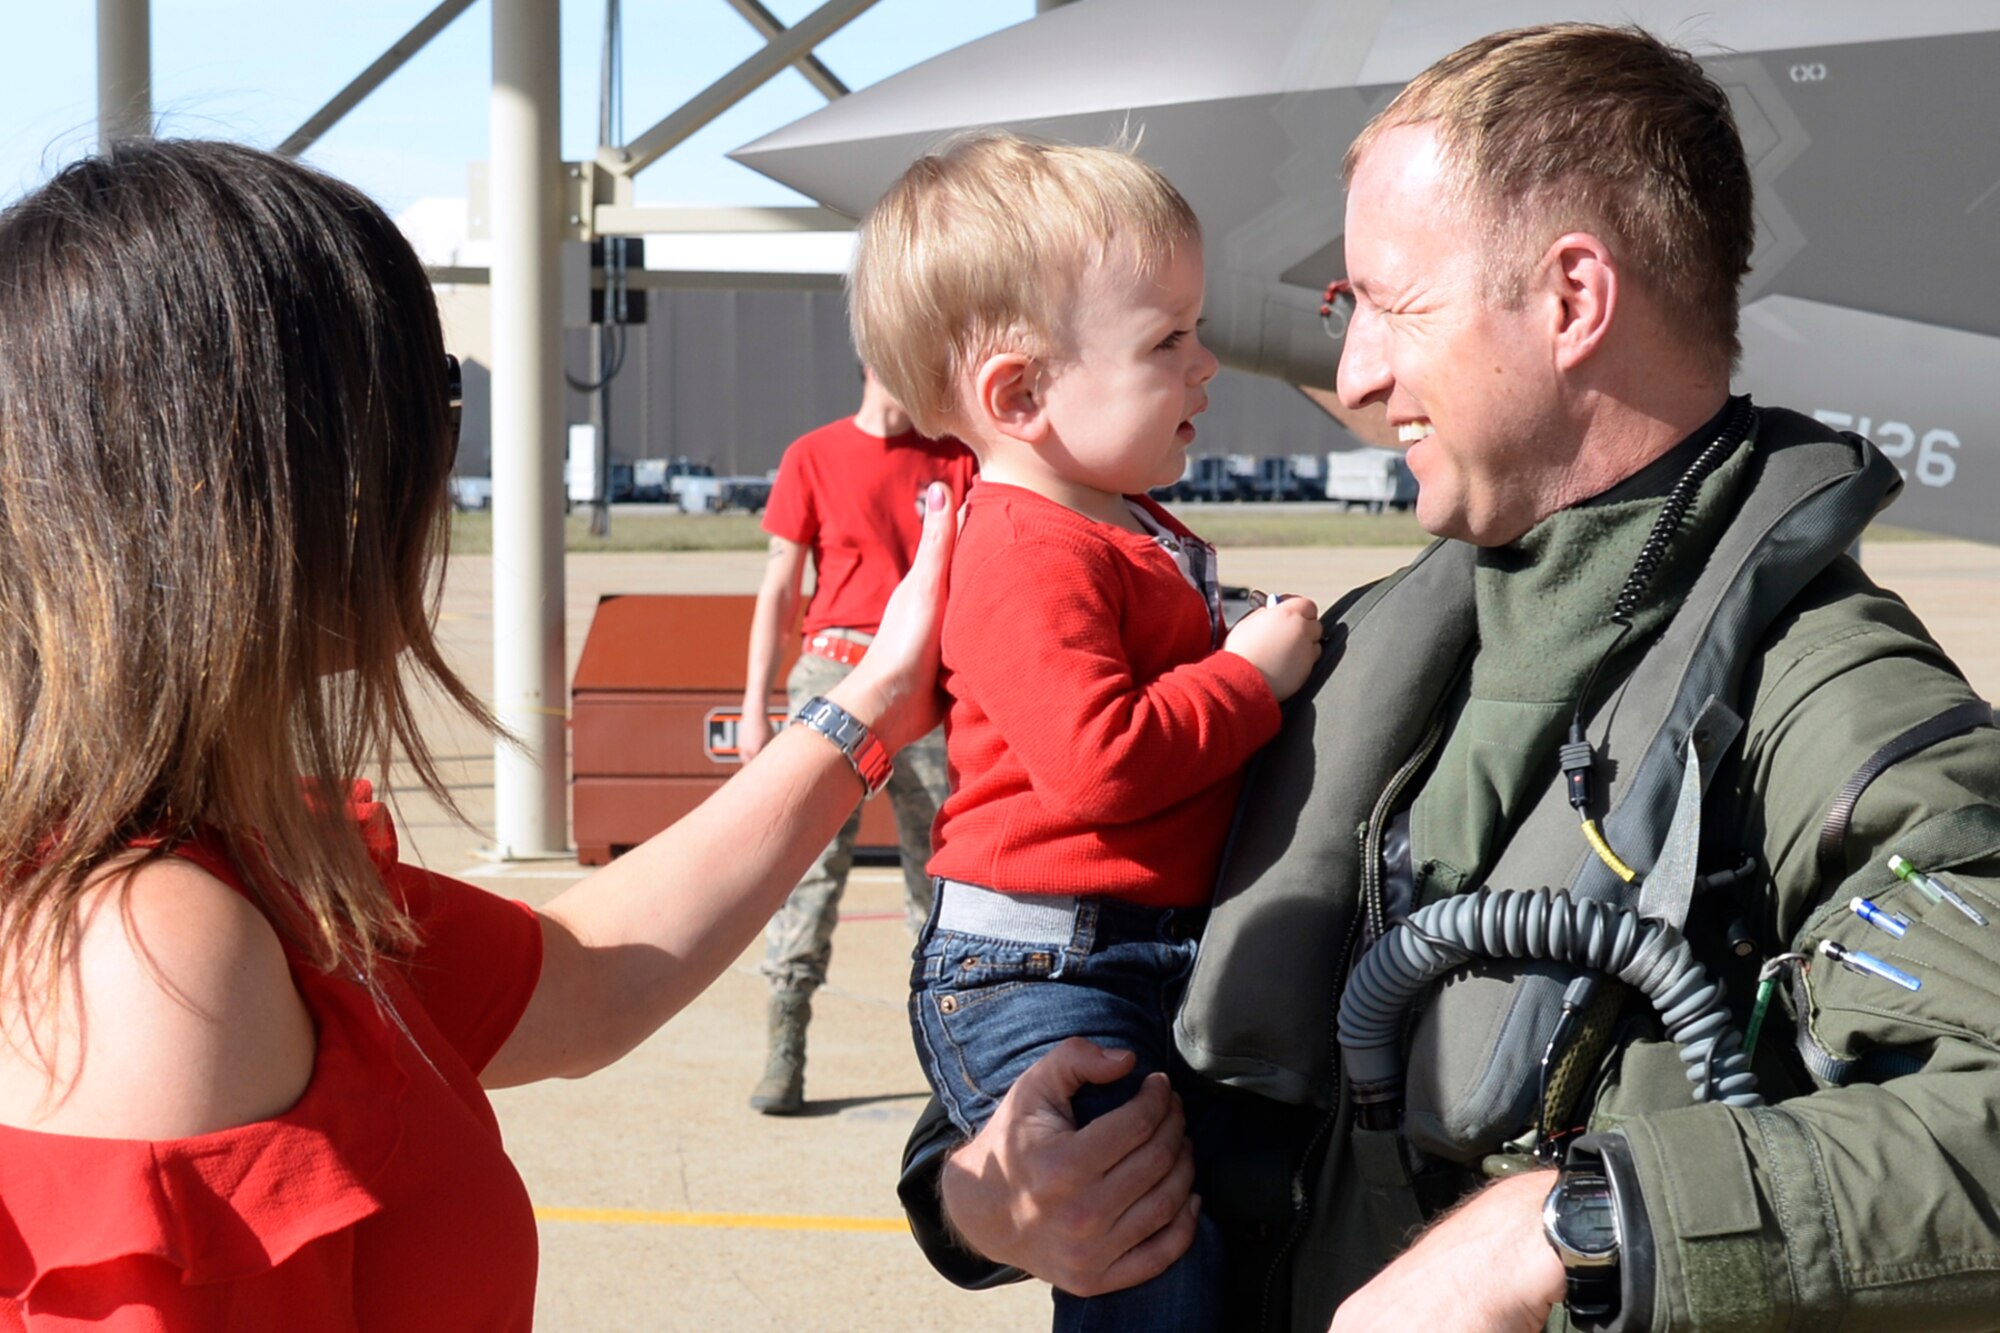 Lt. Col. Matthew Olsen, 388th Fighter Wing, is greeted by his wife and son, Allison and Bryce, upon returning from deployment, May 5, 2018, at Hill Air Force Base, Utah. (U.S. Air Force photo by Todd Cromar)